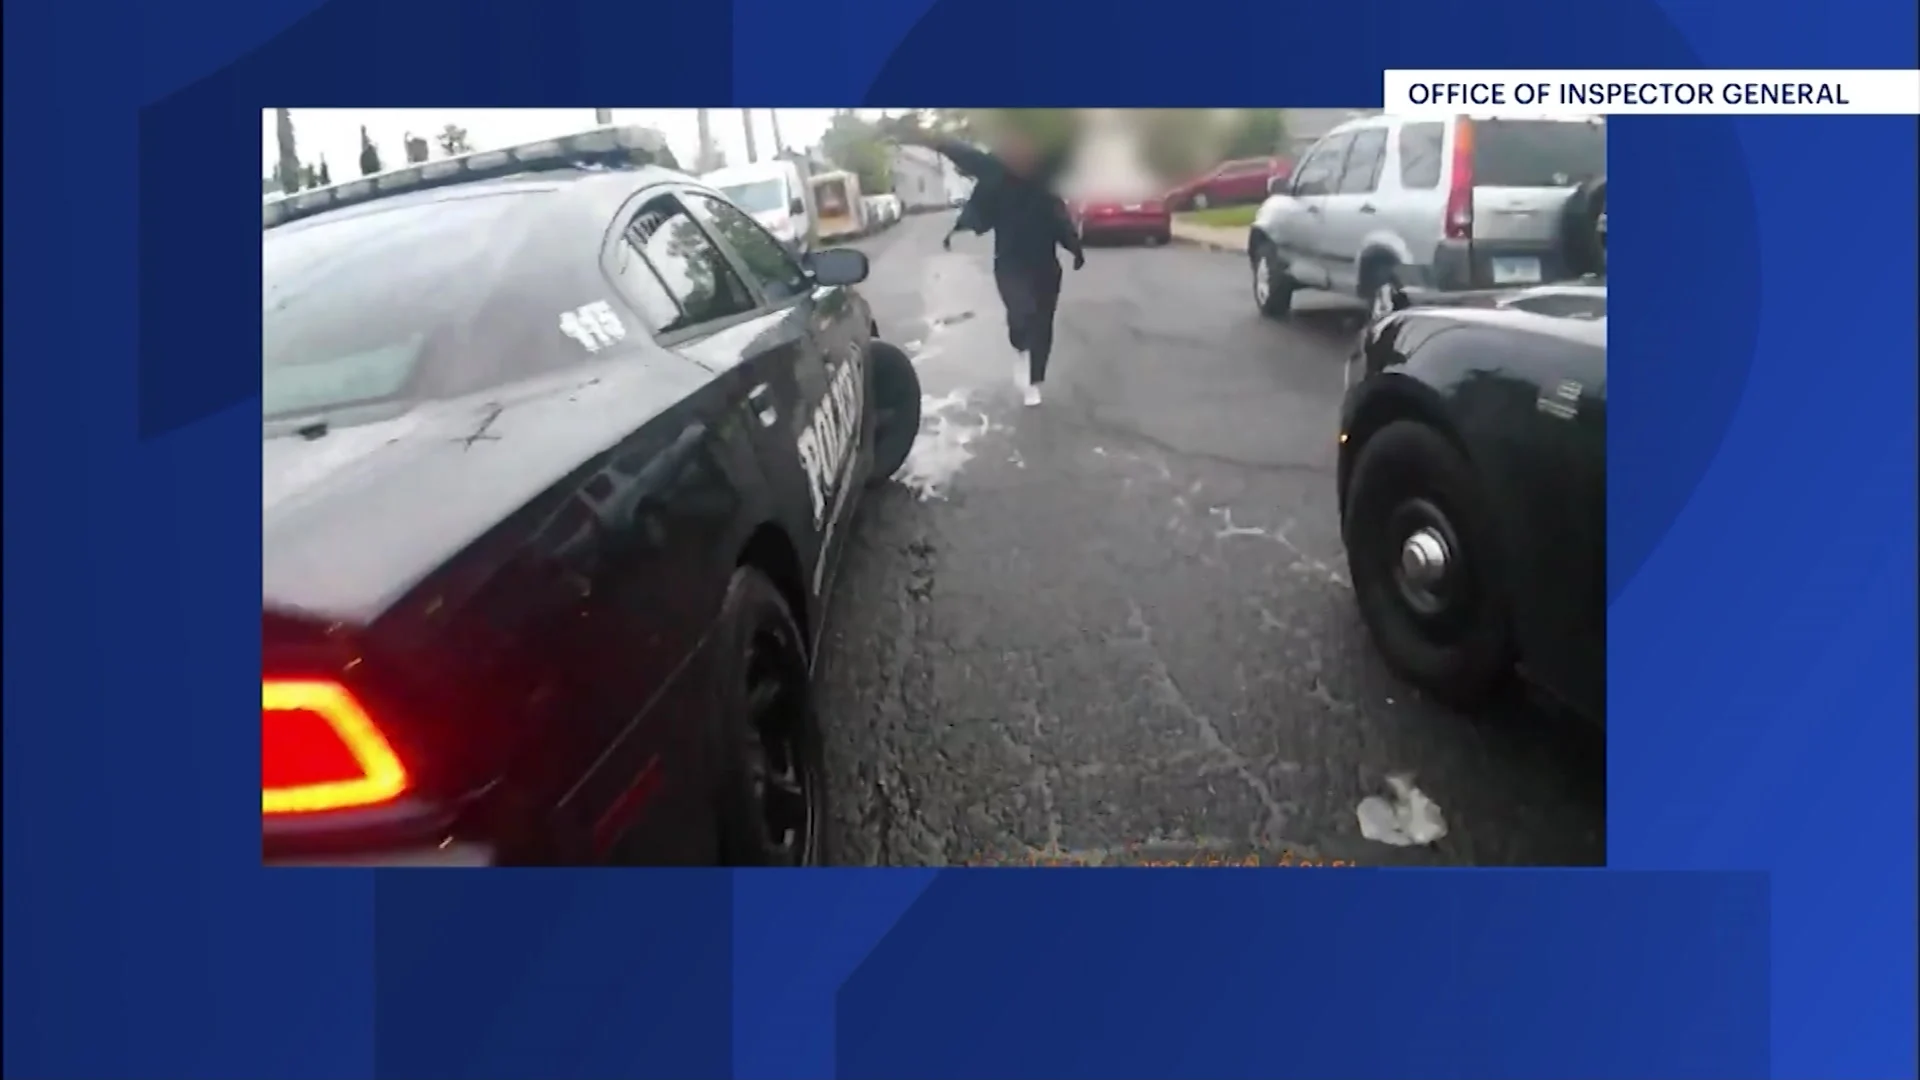 Bodycam video released by authorities shows knife-wielding man charging at Bridgeport officer